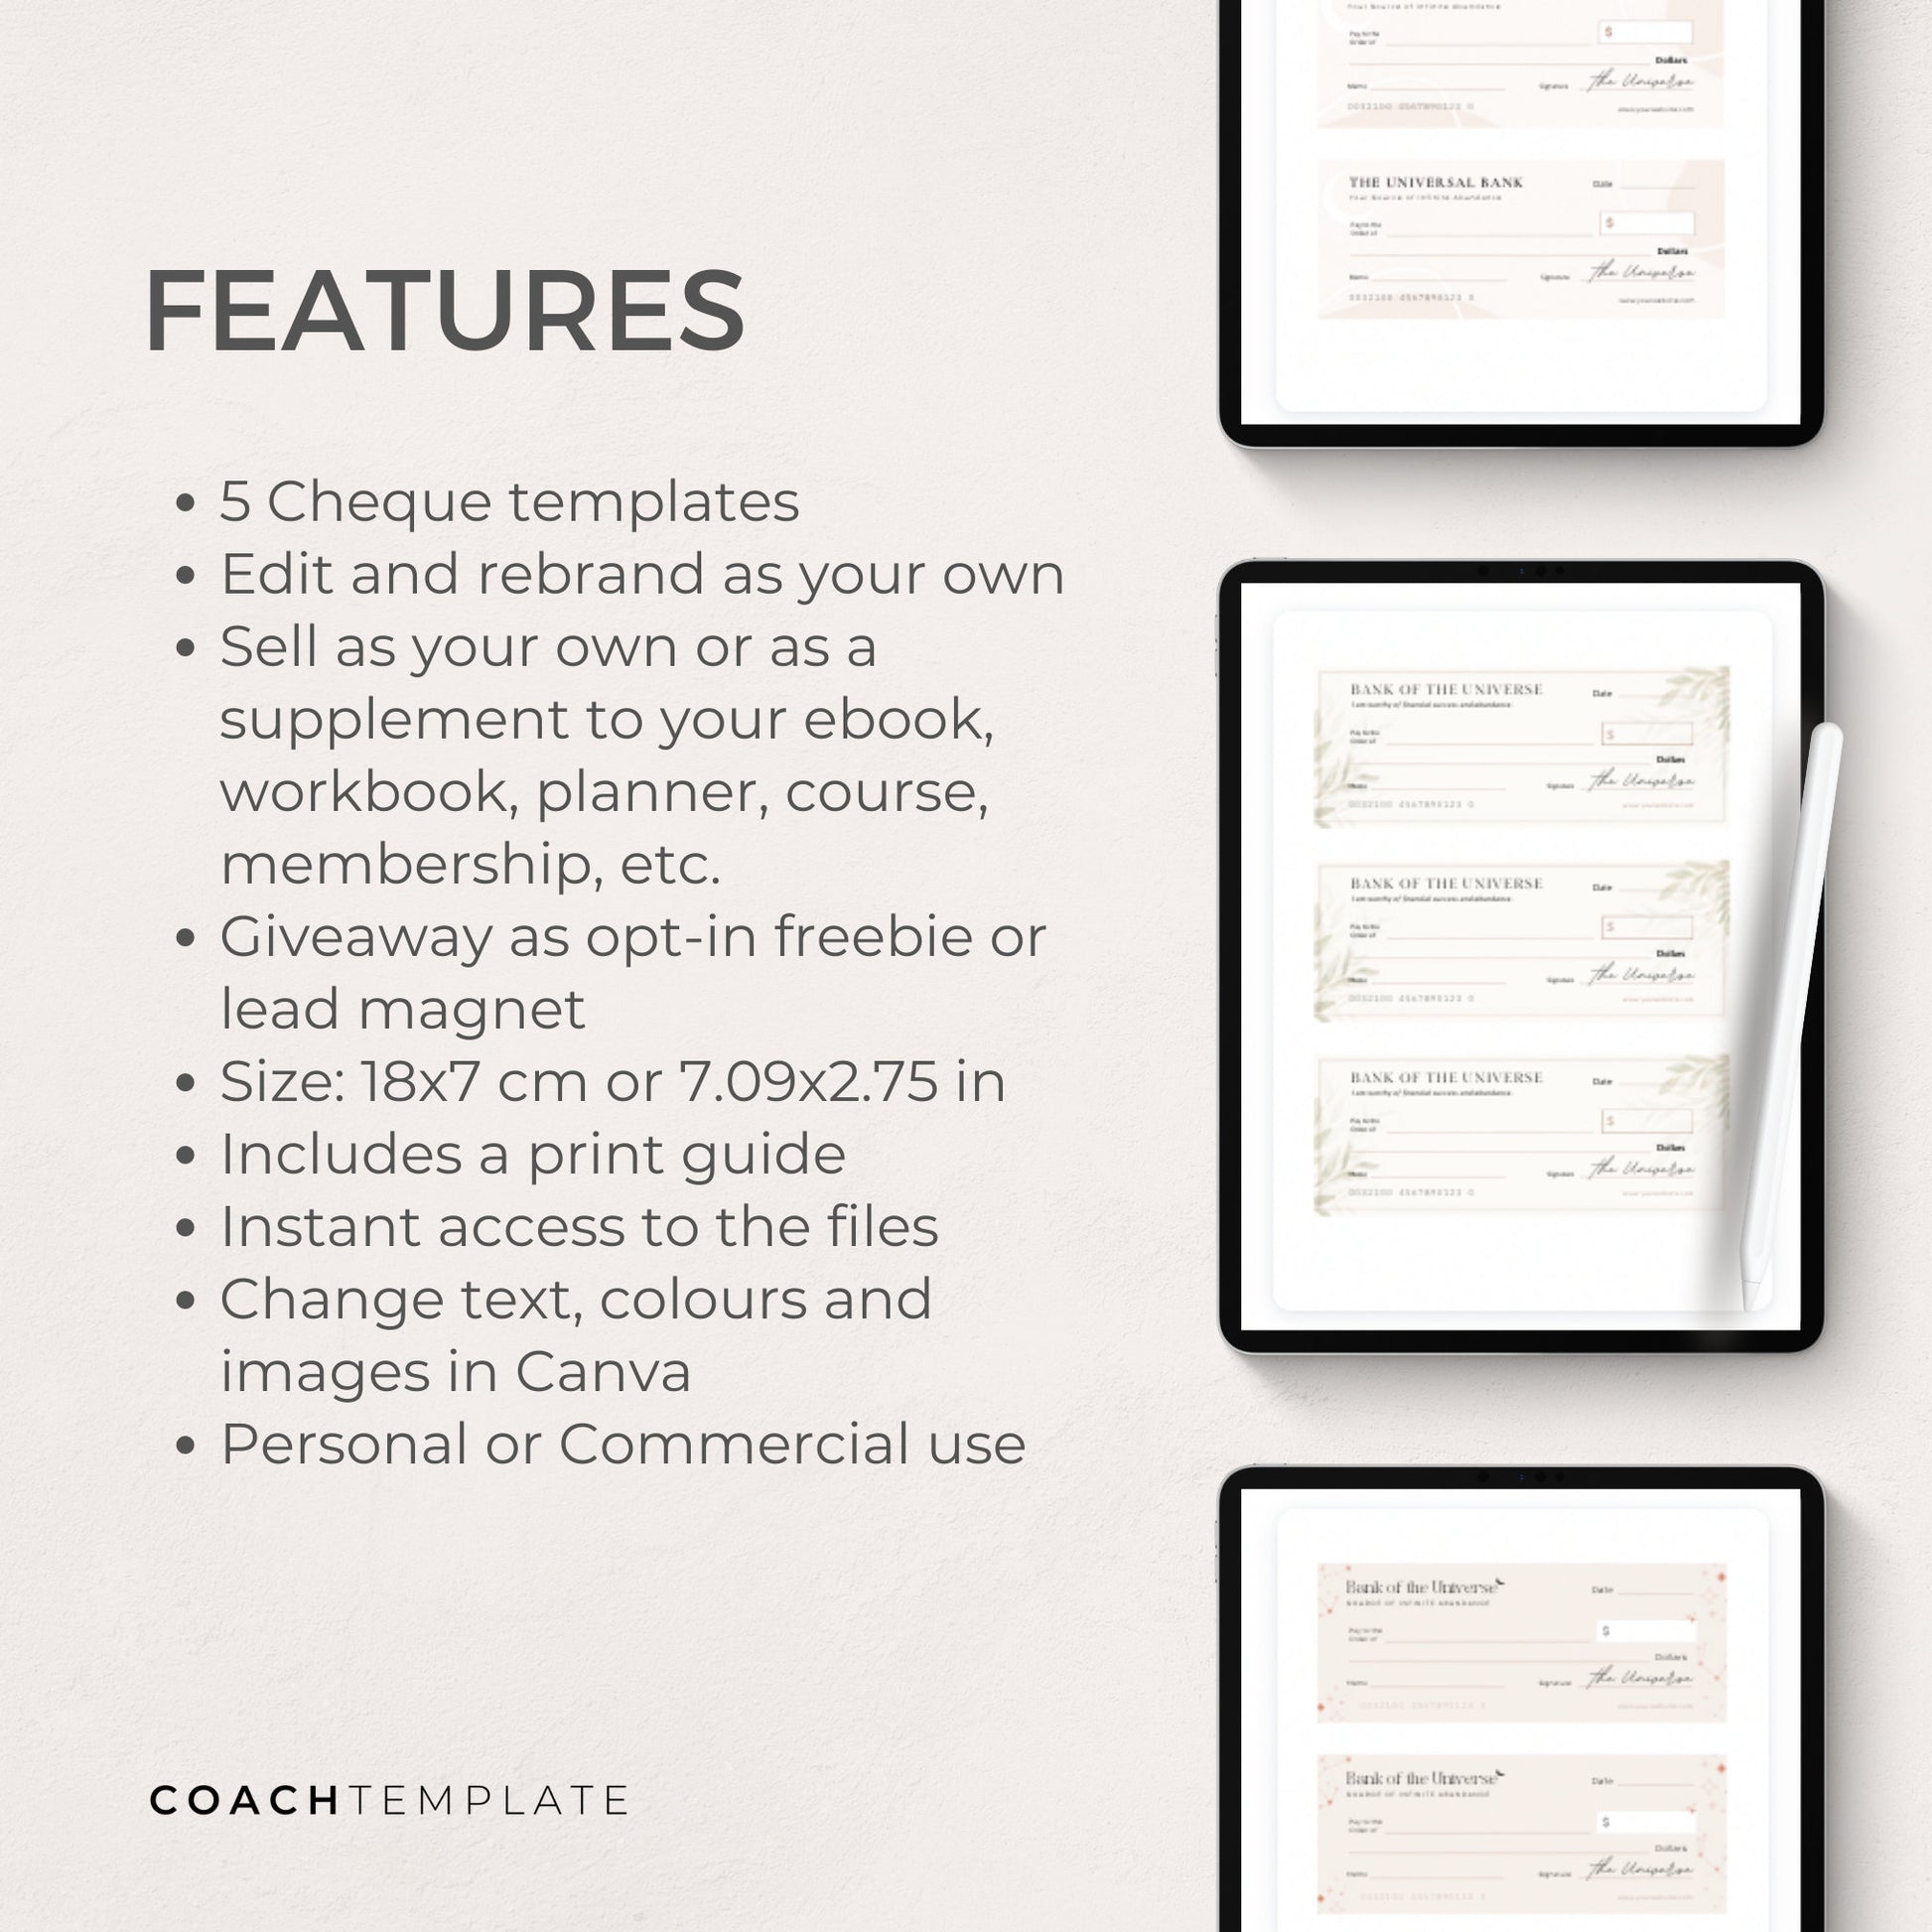 Editable Money Manifesting Cheque, Financial Abundance Manifestation Check Canva Template, Mindset Life Coach Small Business, Commercial Use, Law of Attraction, Done-for-you Content Design Template


CoachTemplate.com CT057